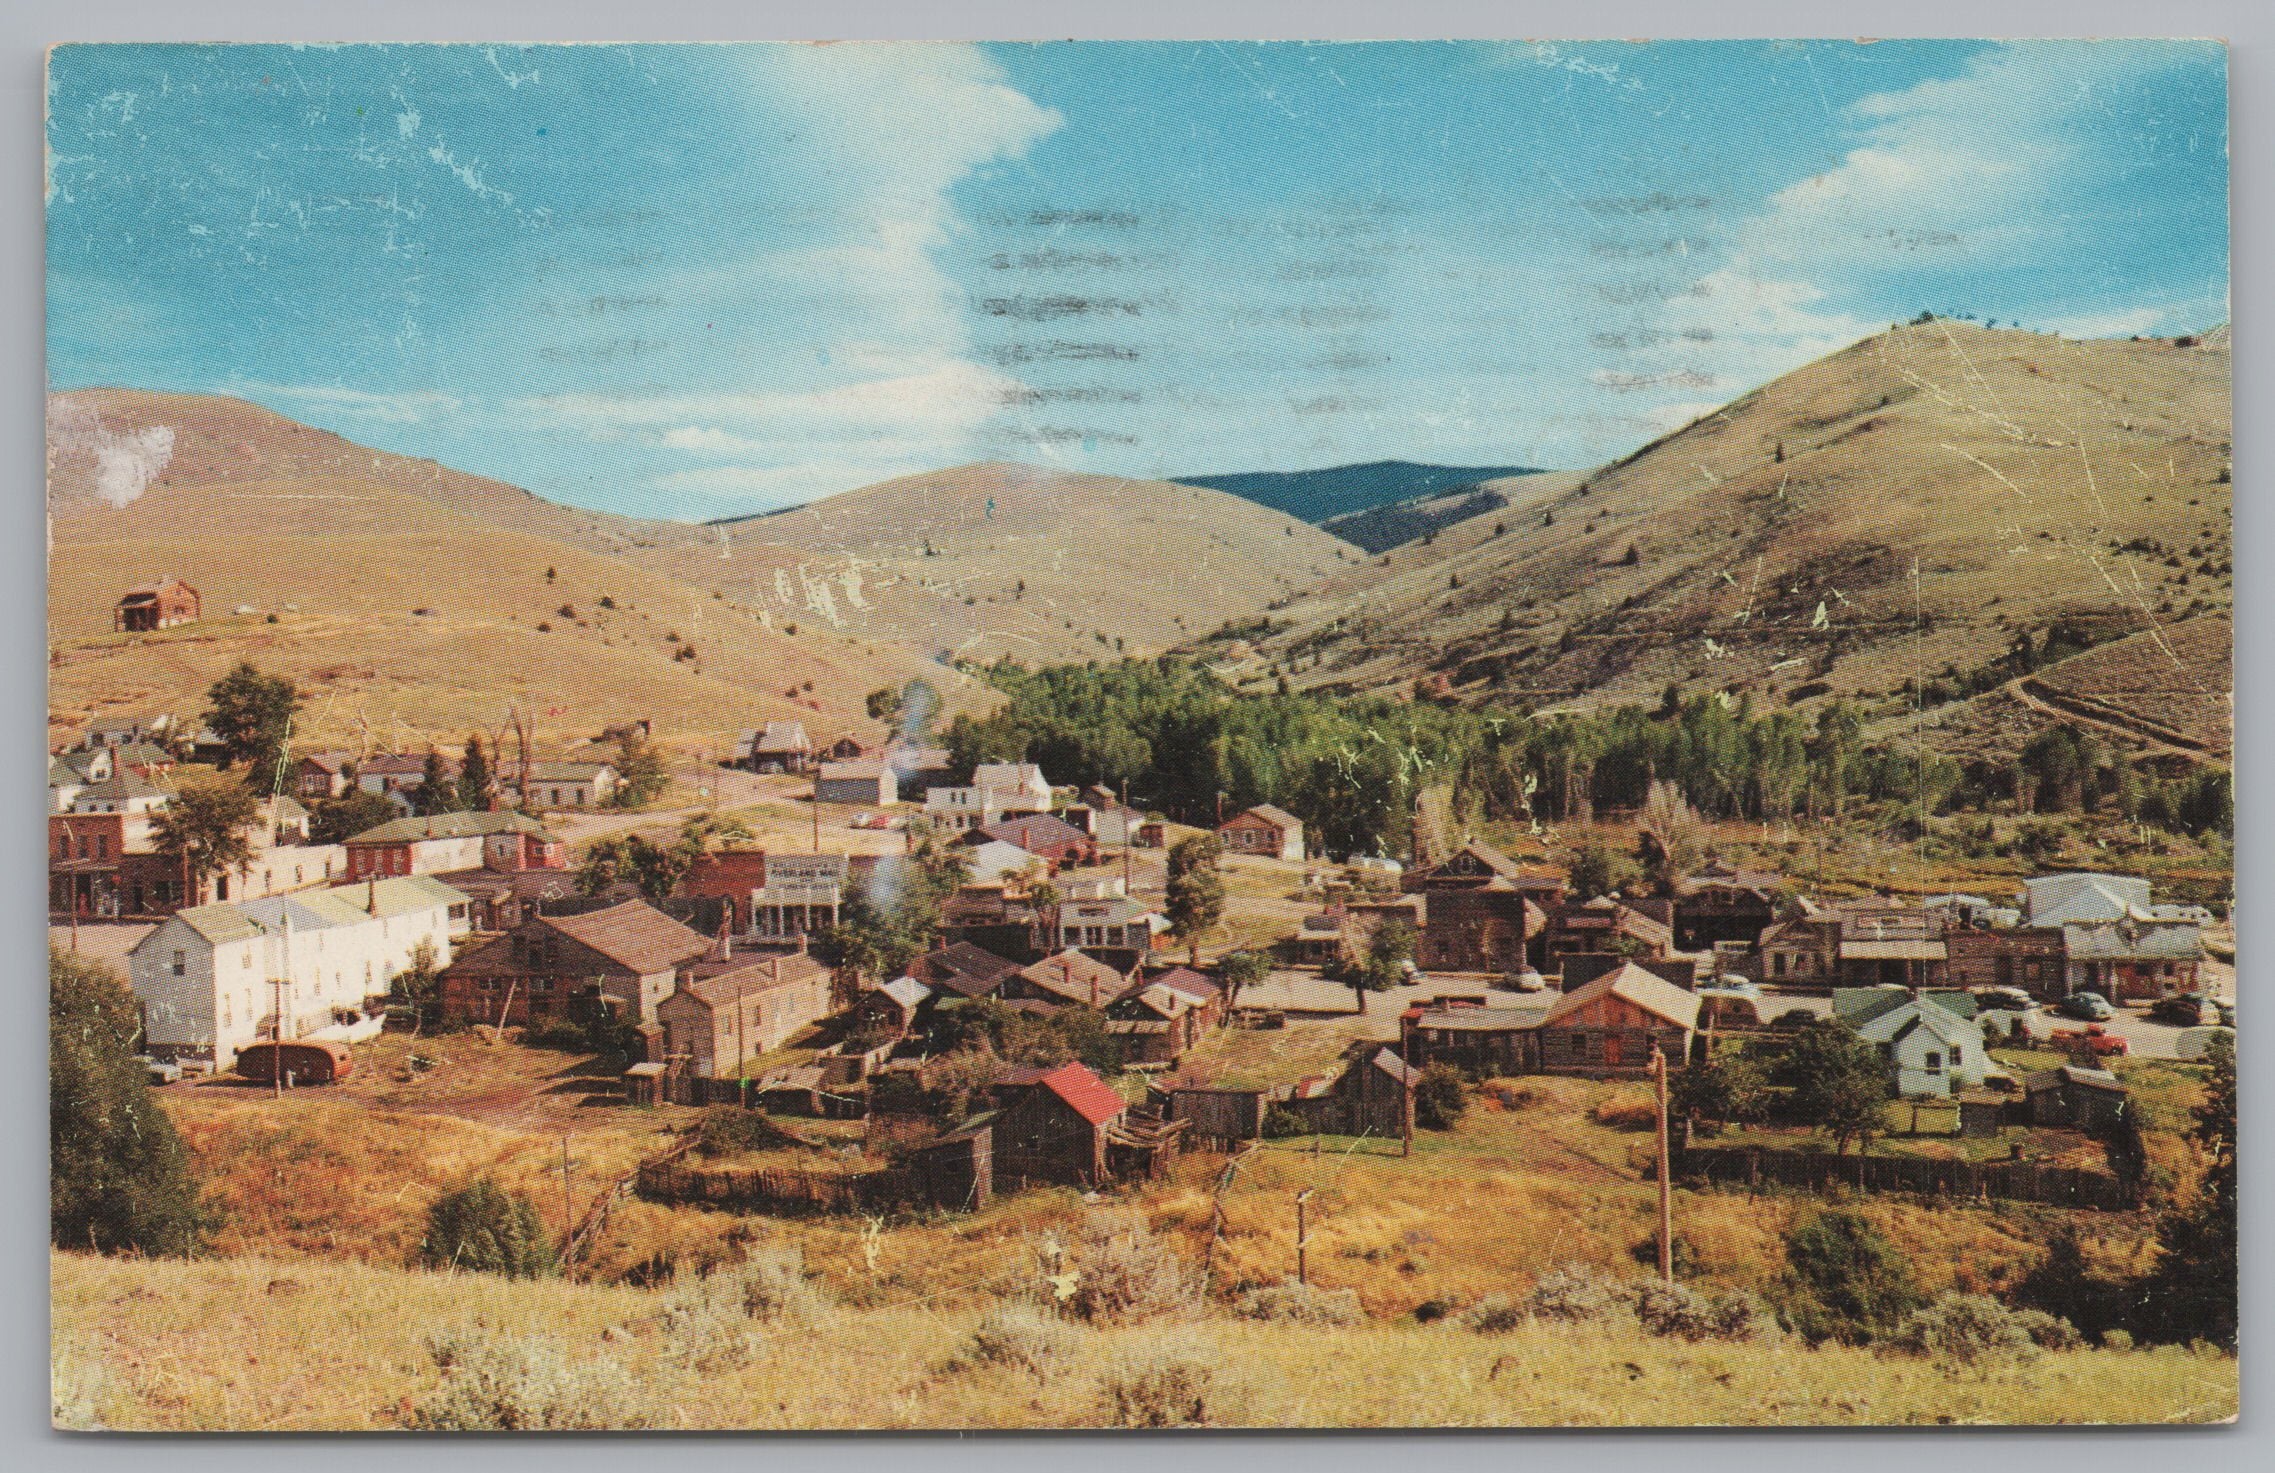 Cradle Of Montana History, Virginia City, Montana From Boot Hill, Vintage Post Card.